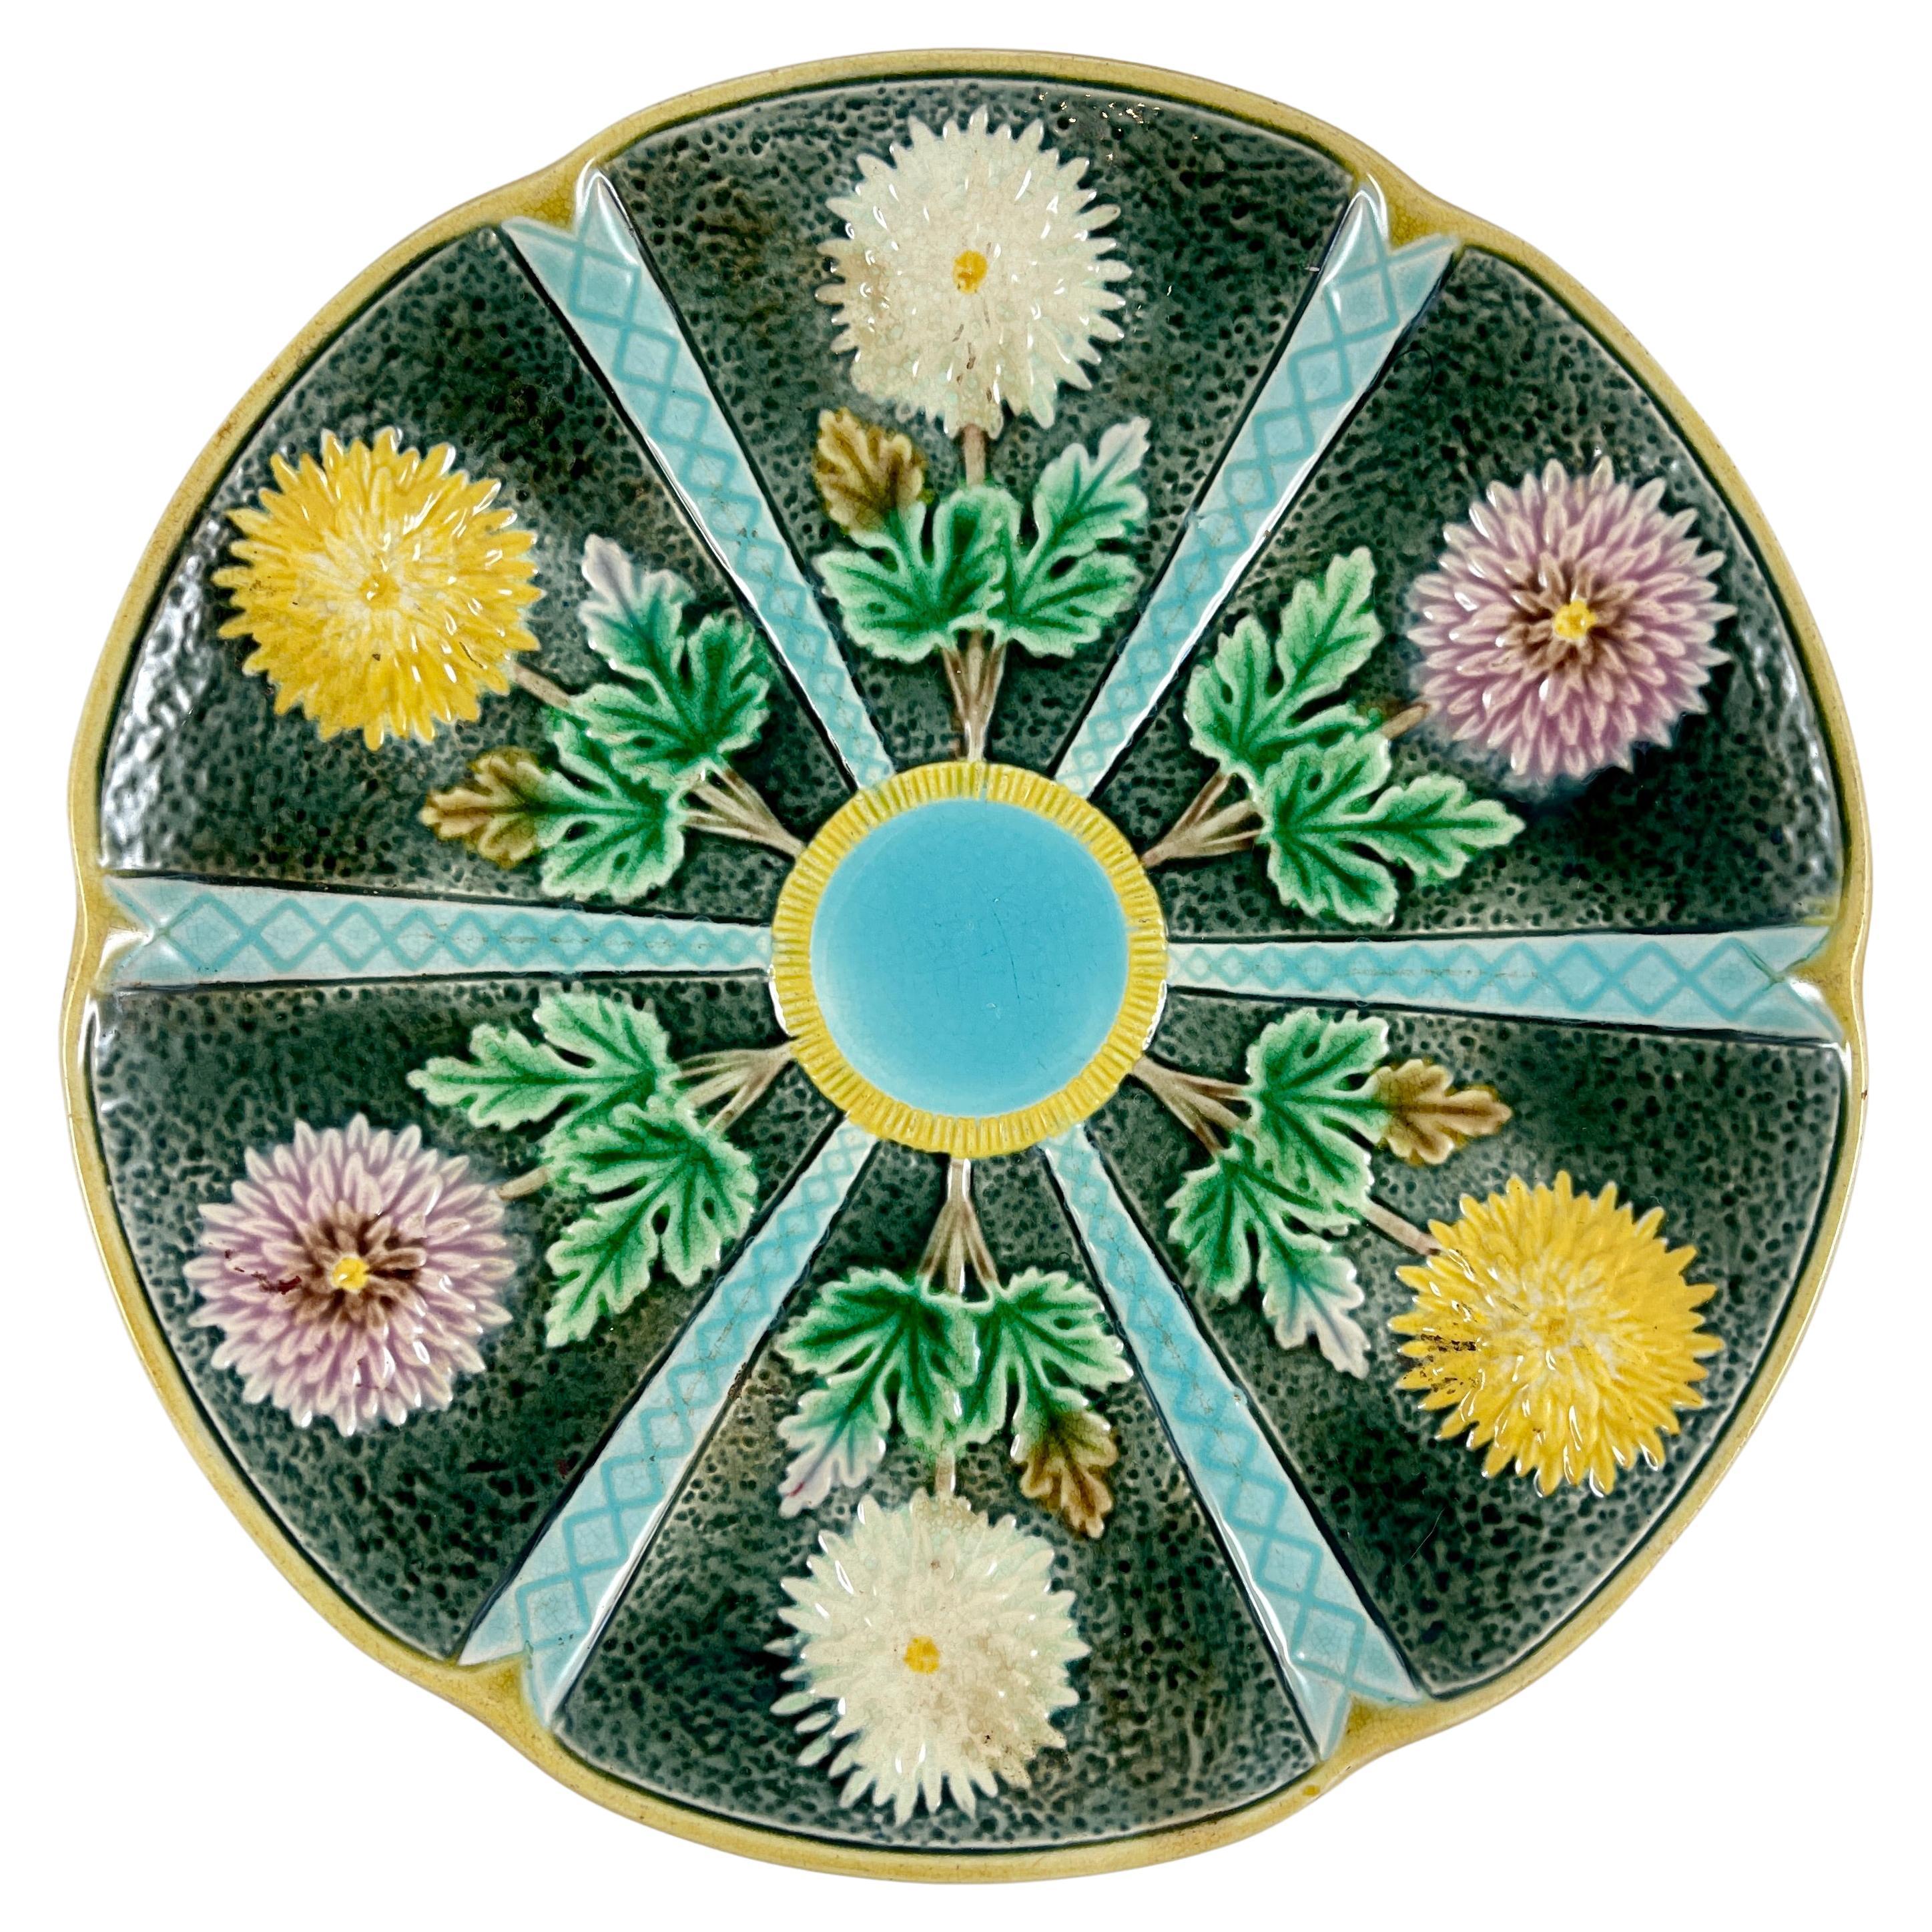 Wedgwood Majolica Chrysanthemum Japonisme Oyster Plate, Date Marked 1883